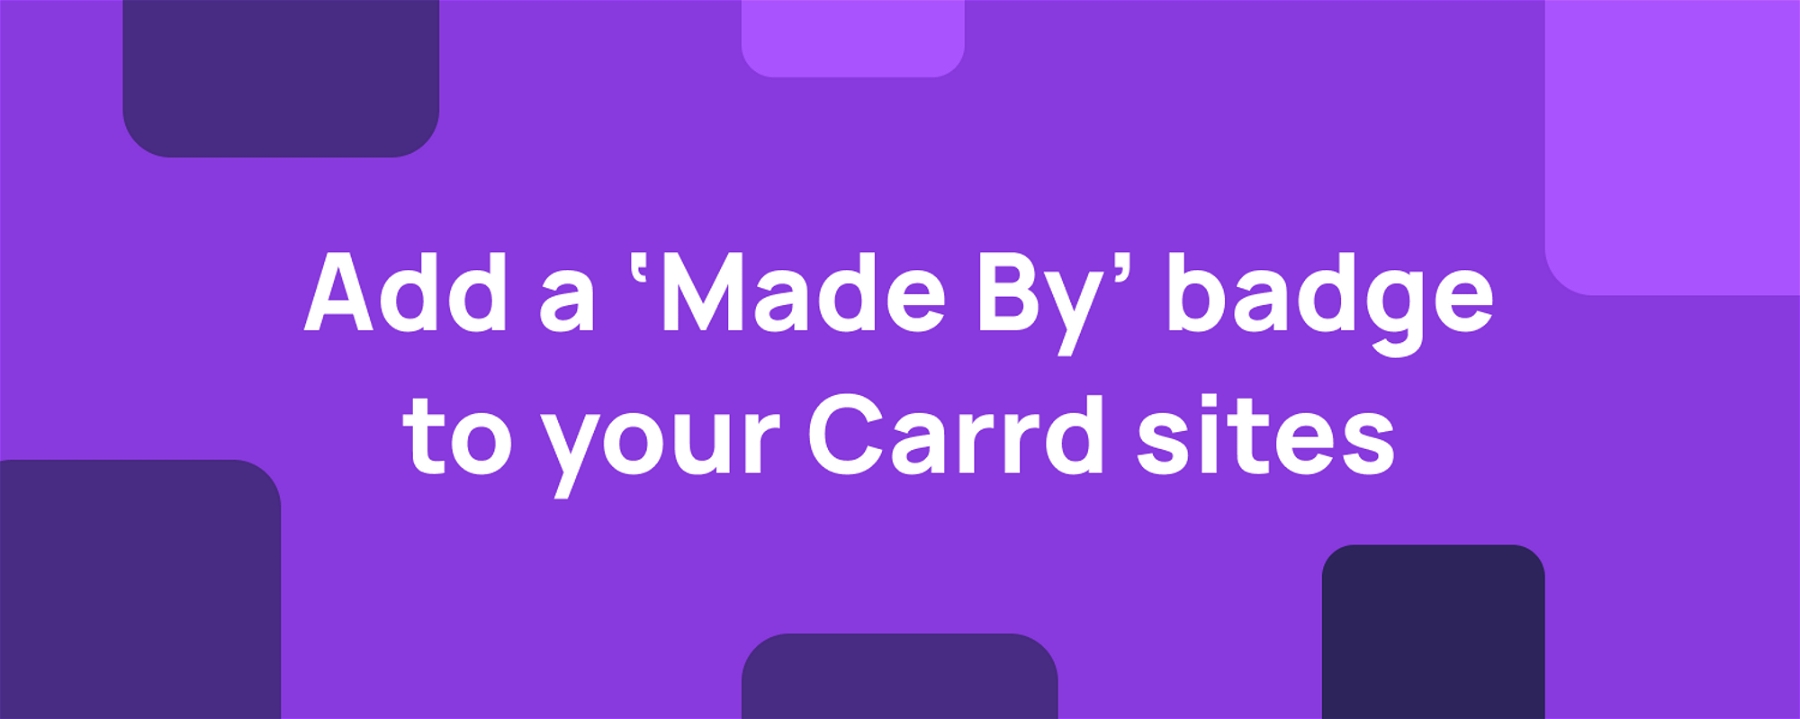 Add a ‘Made By’ badge to your Carrd sites